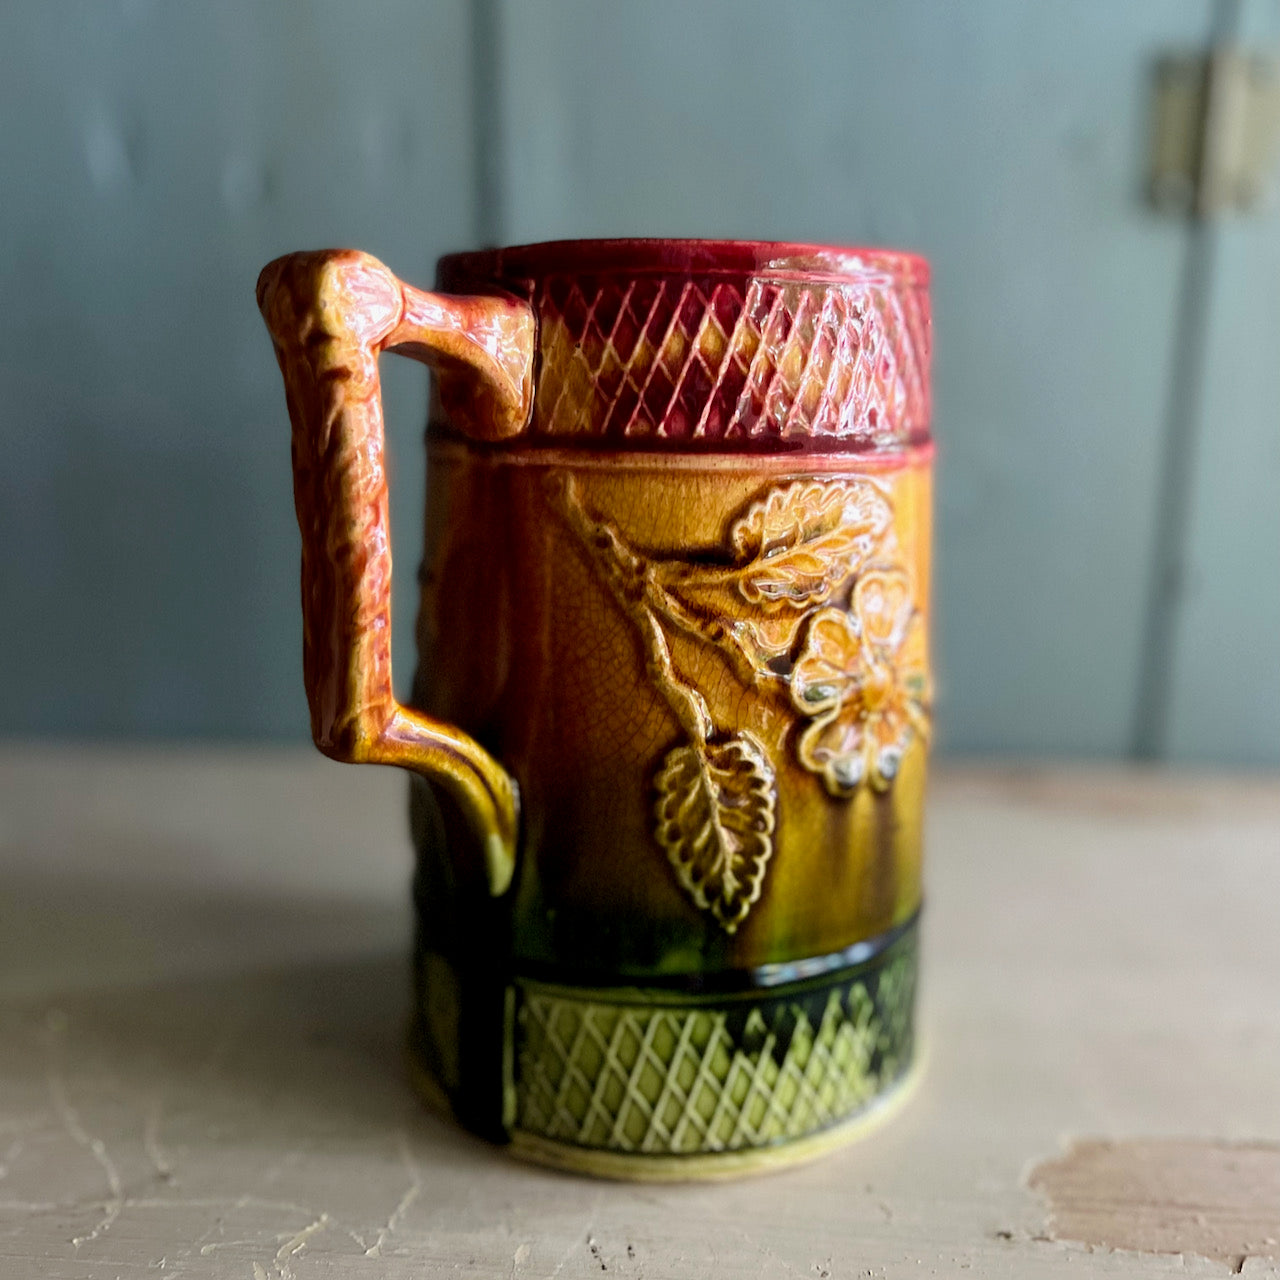 English Majolica Pitcher with Floral Lattice Motif